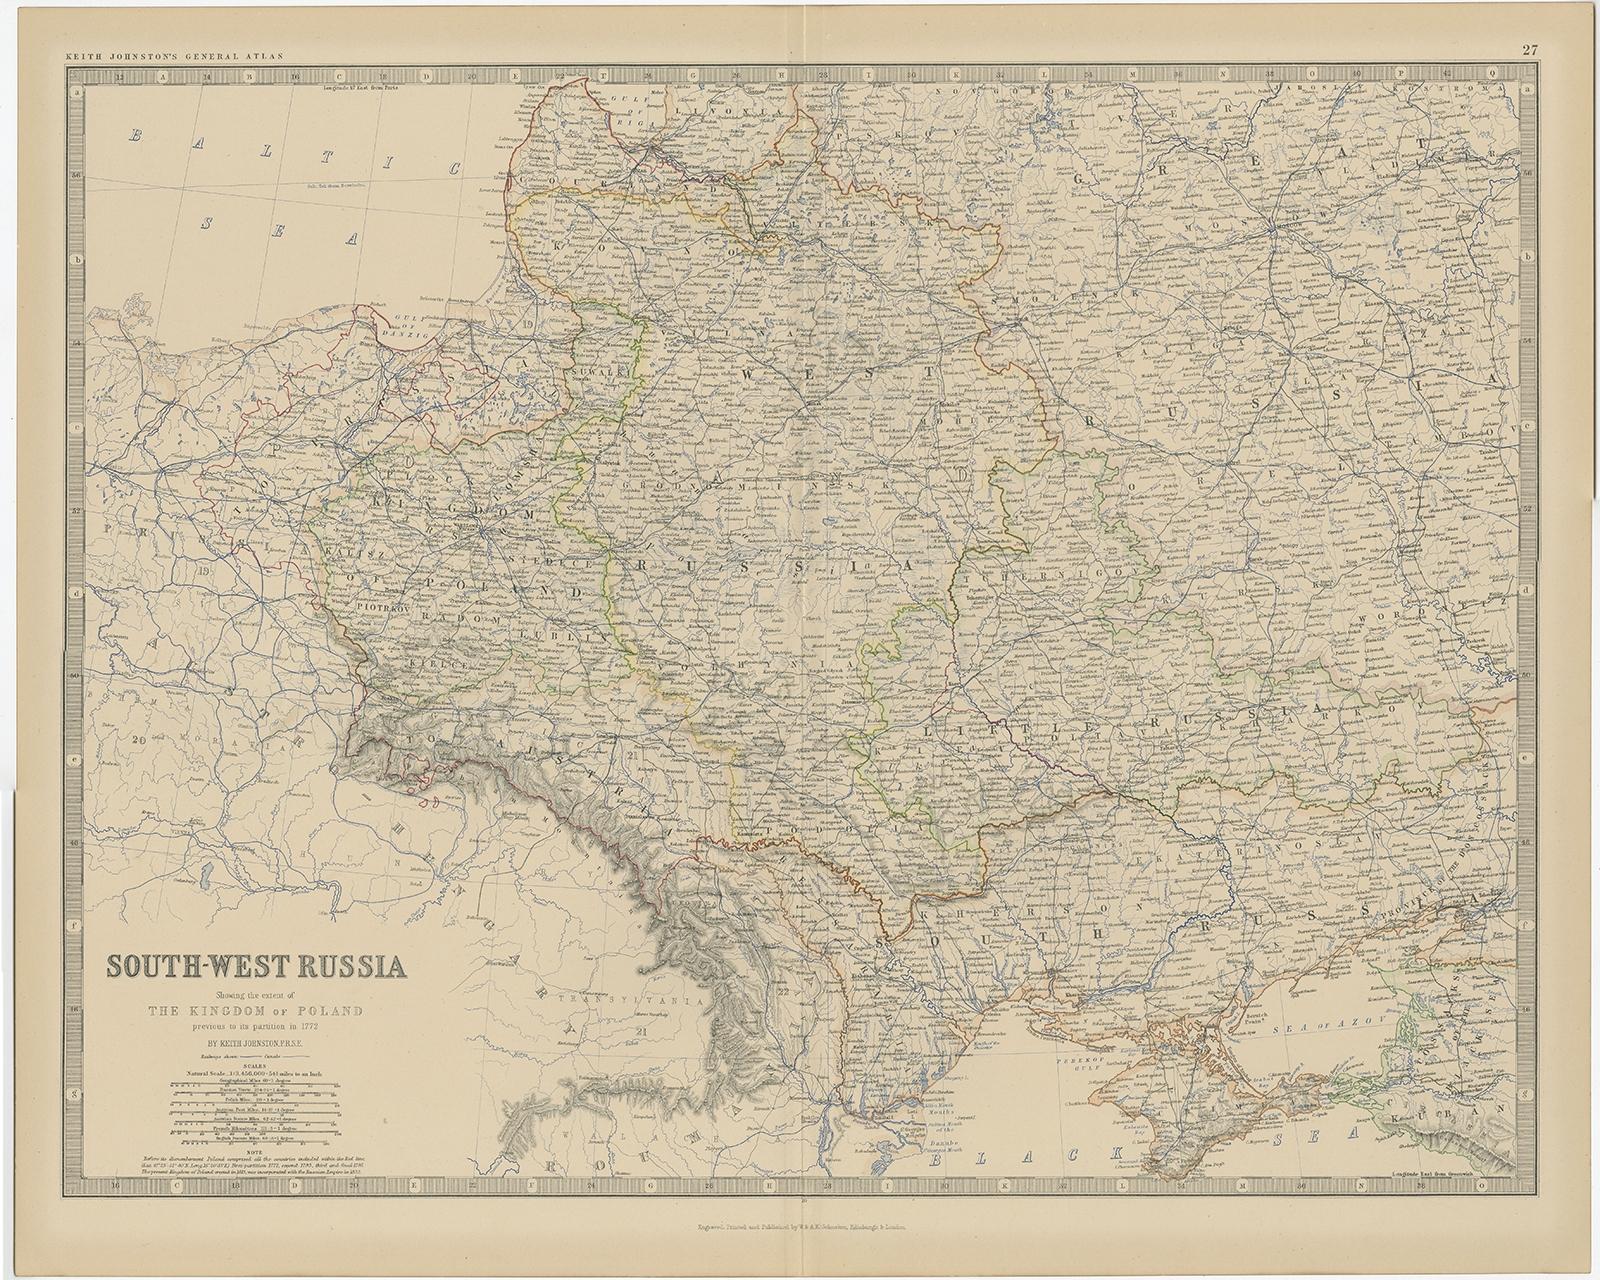 Antique map titled 'South-West Russia'.

Old map of southern Russia, also showing the extent of the Kingdom of Poland. This map originates from 'The Royal Atlas of Modern Geography, Exhibiting, in a Series of Entirely Original and Authentic Maps,